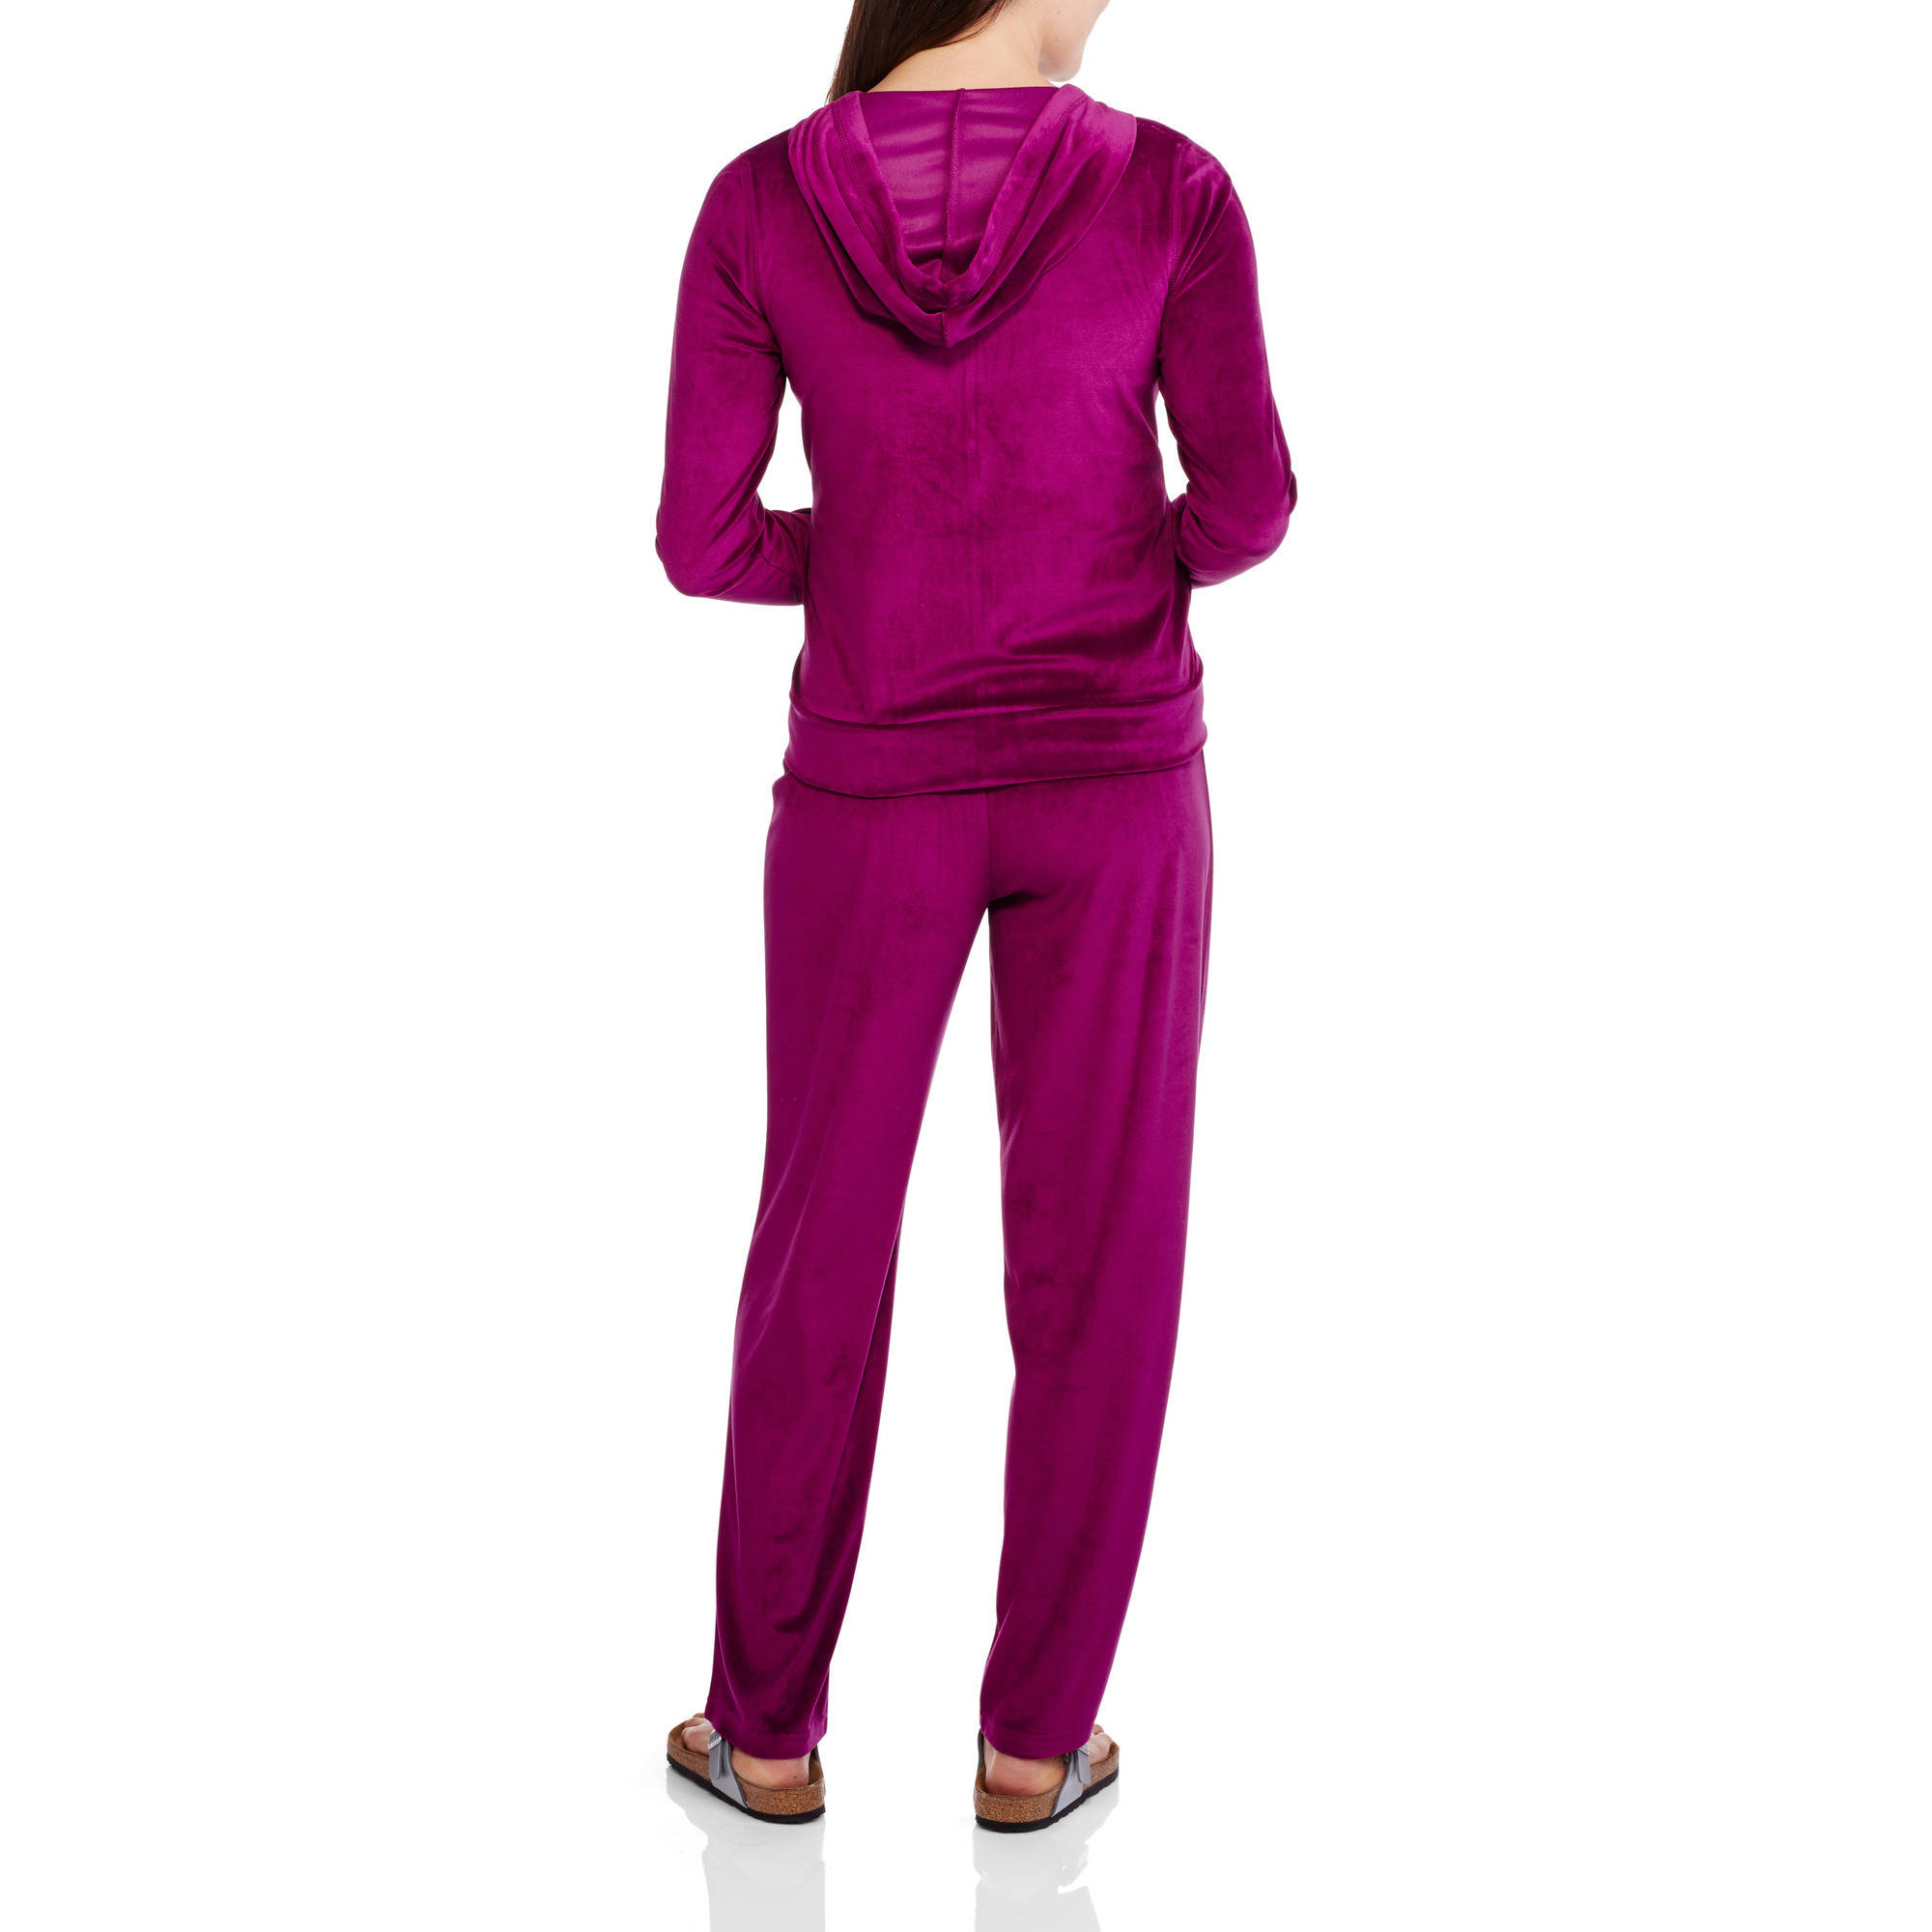 Women's Velour Tracksuit Set with Hoodie - image 2 of 2